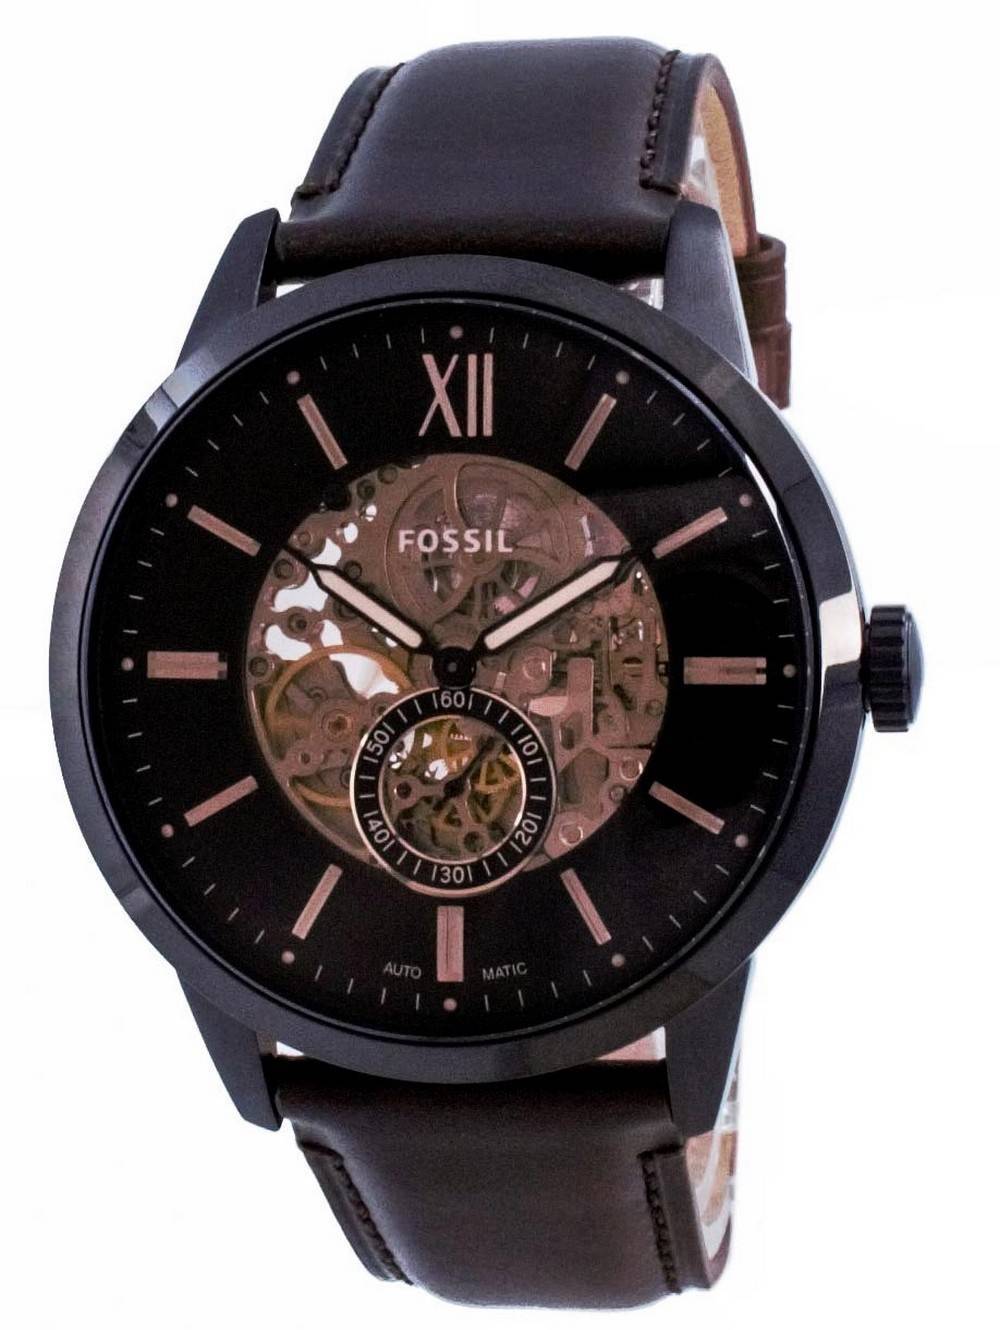 Fossil Watches for Men & Women: CreationWatches